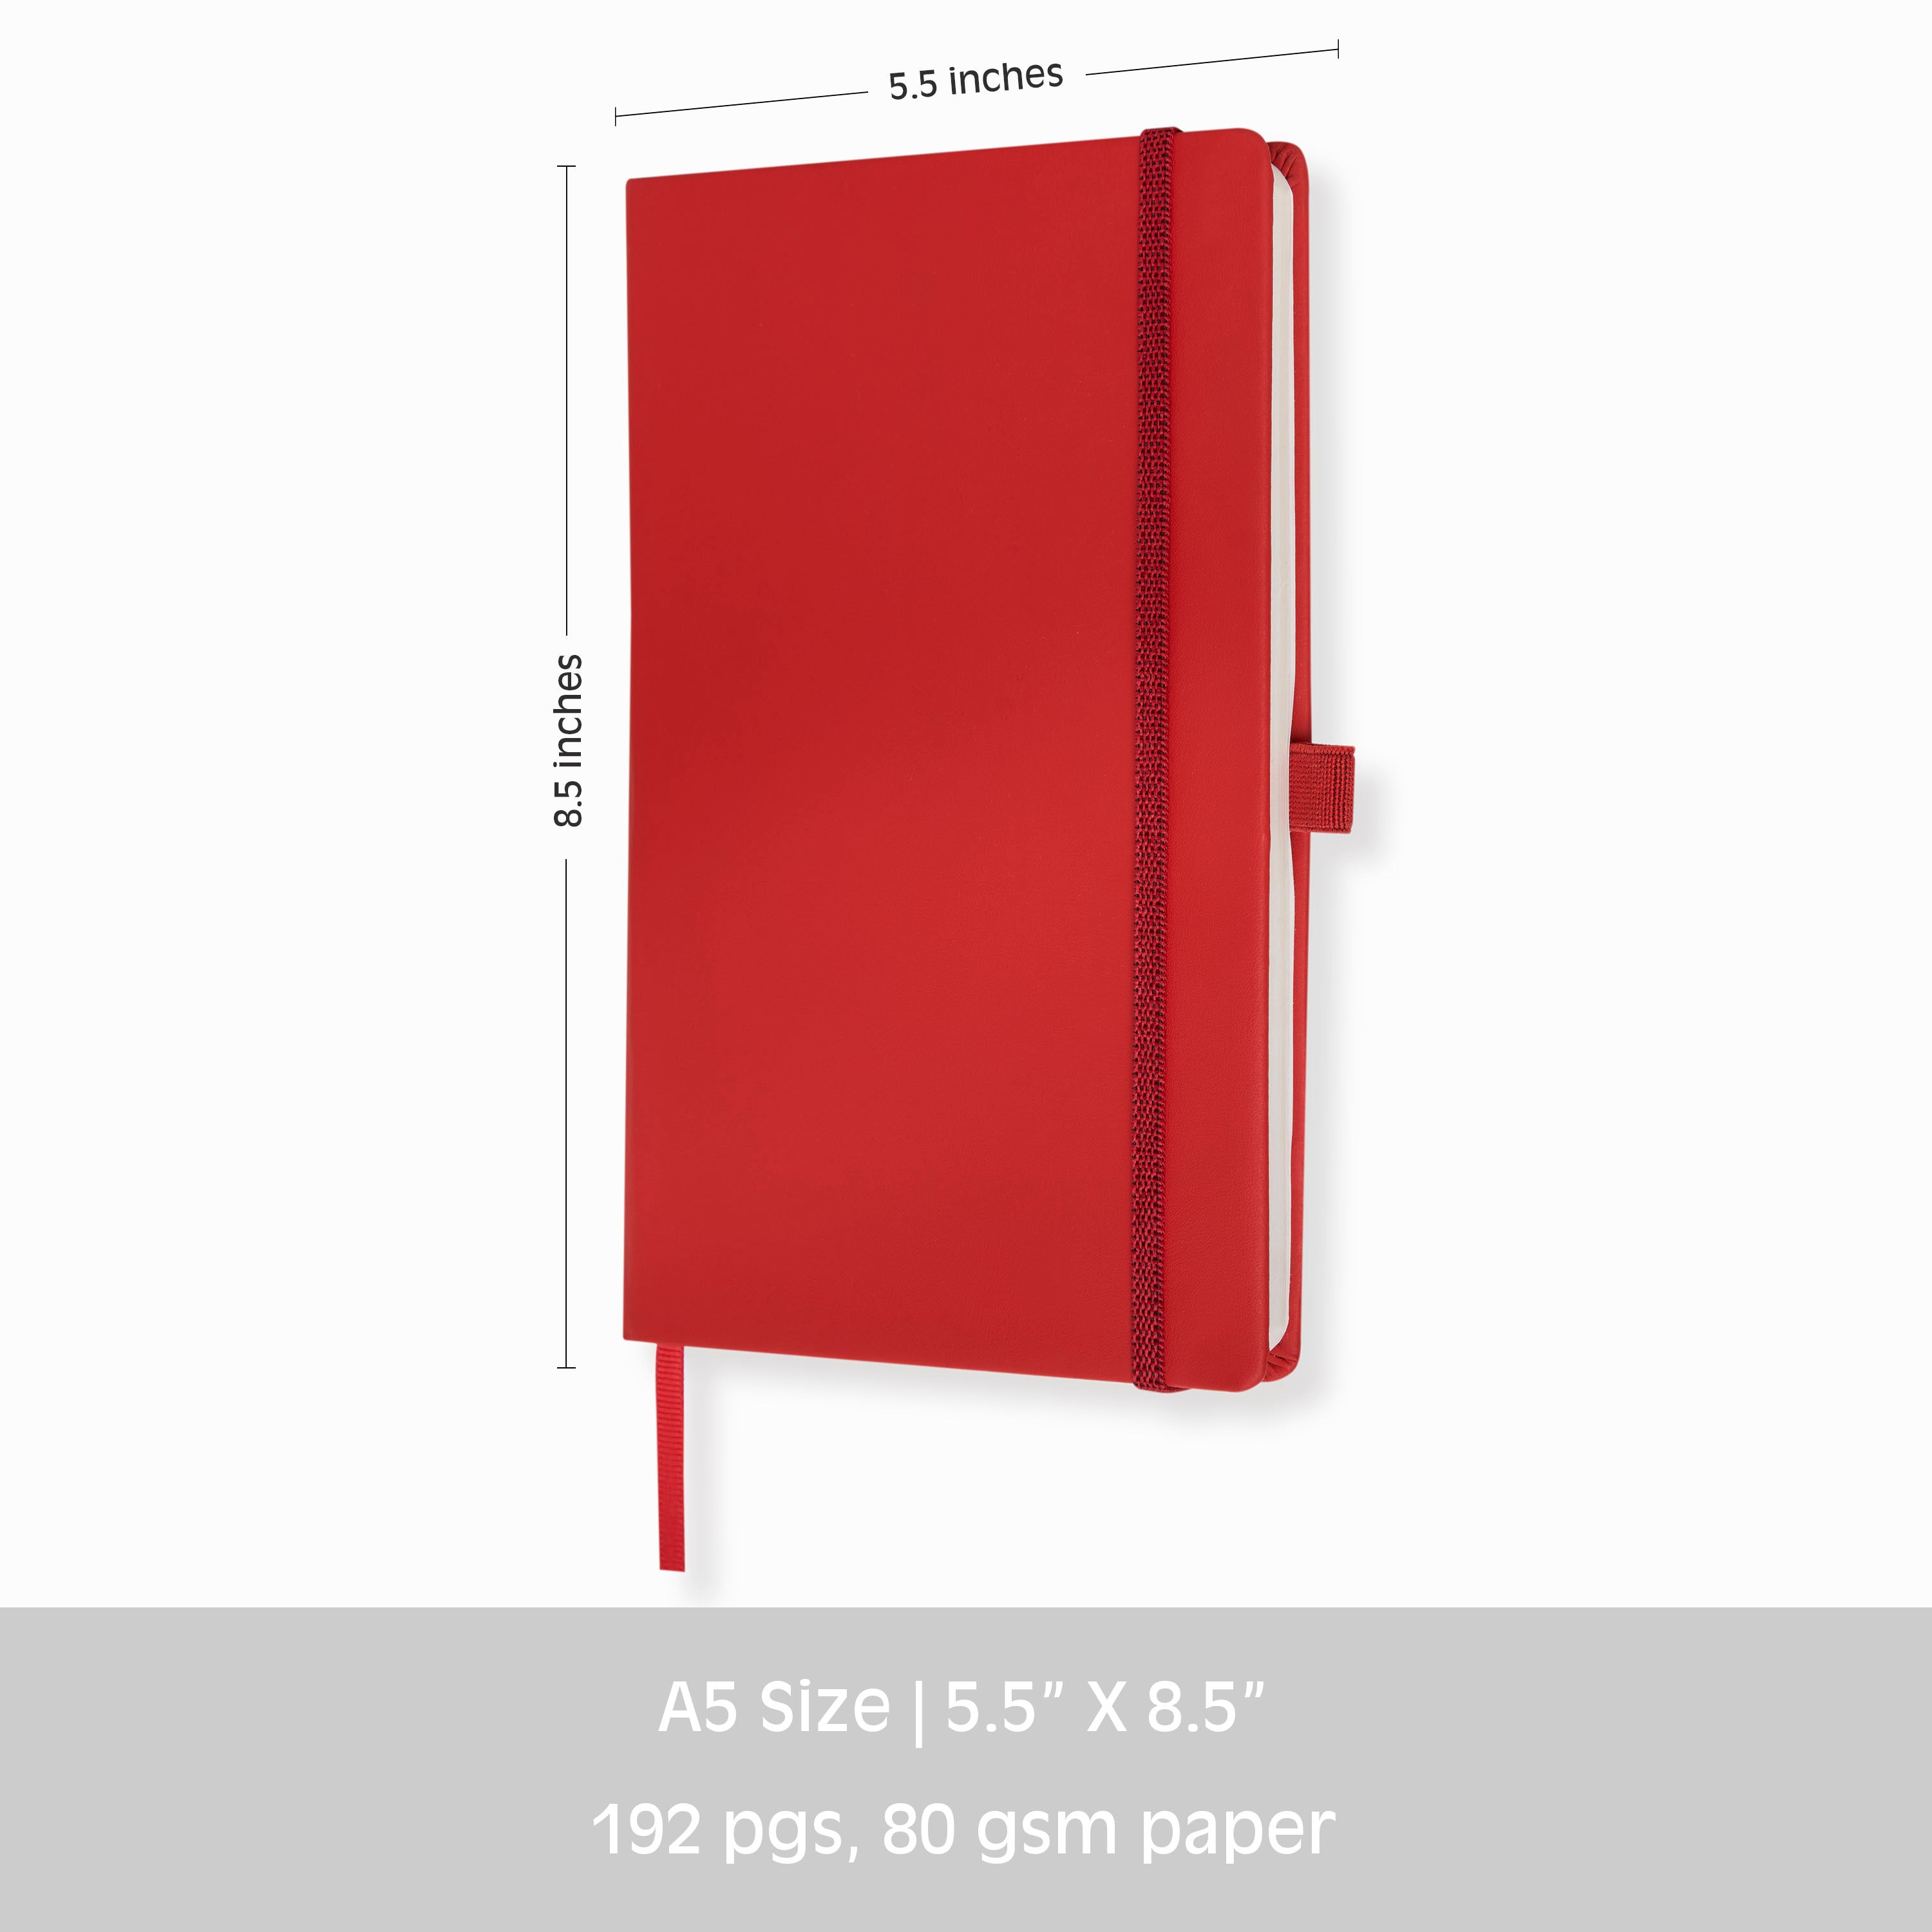 Pro Series Executive A5 PU Leather Hardbound Ruled Diary with Pen Loop - RED